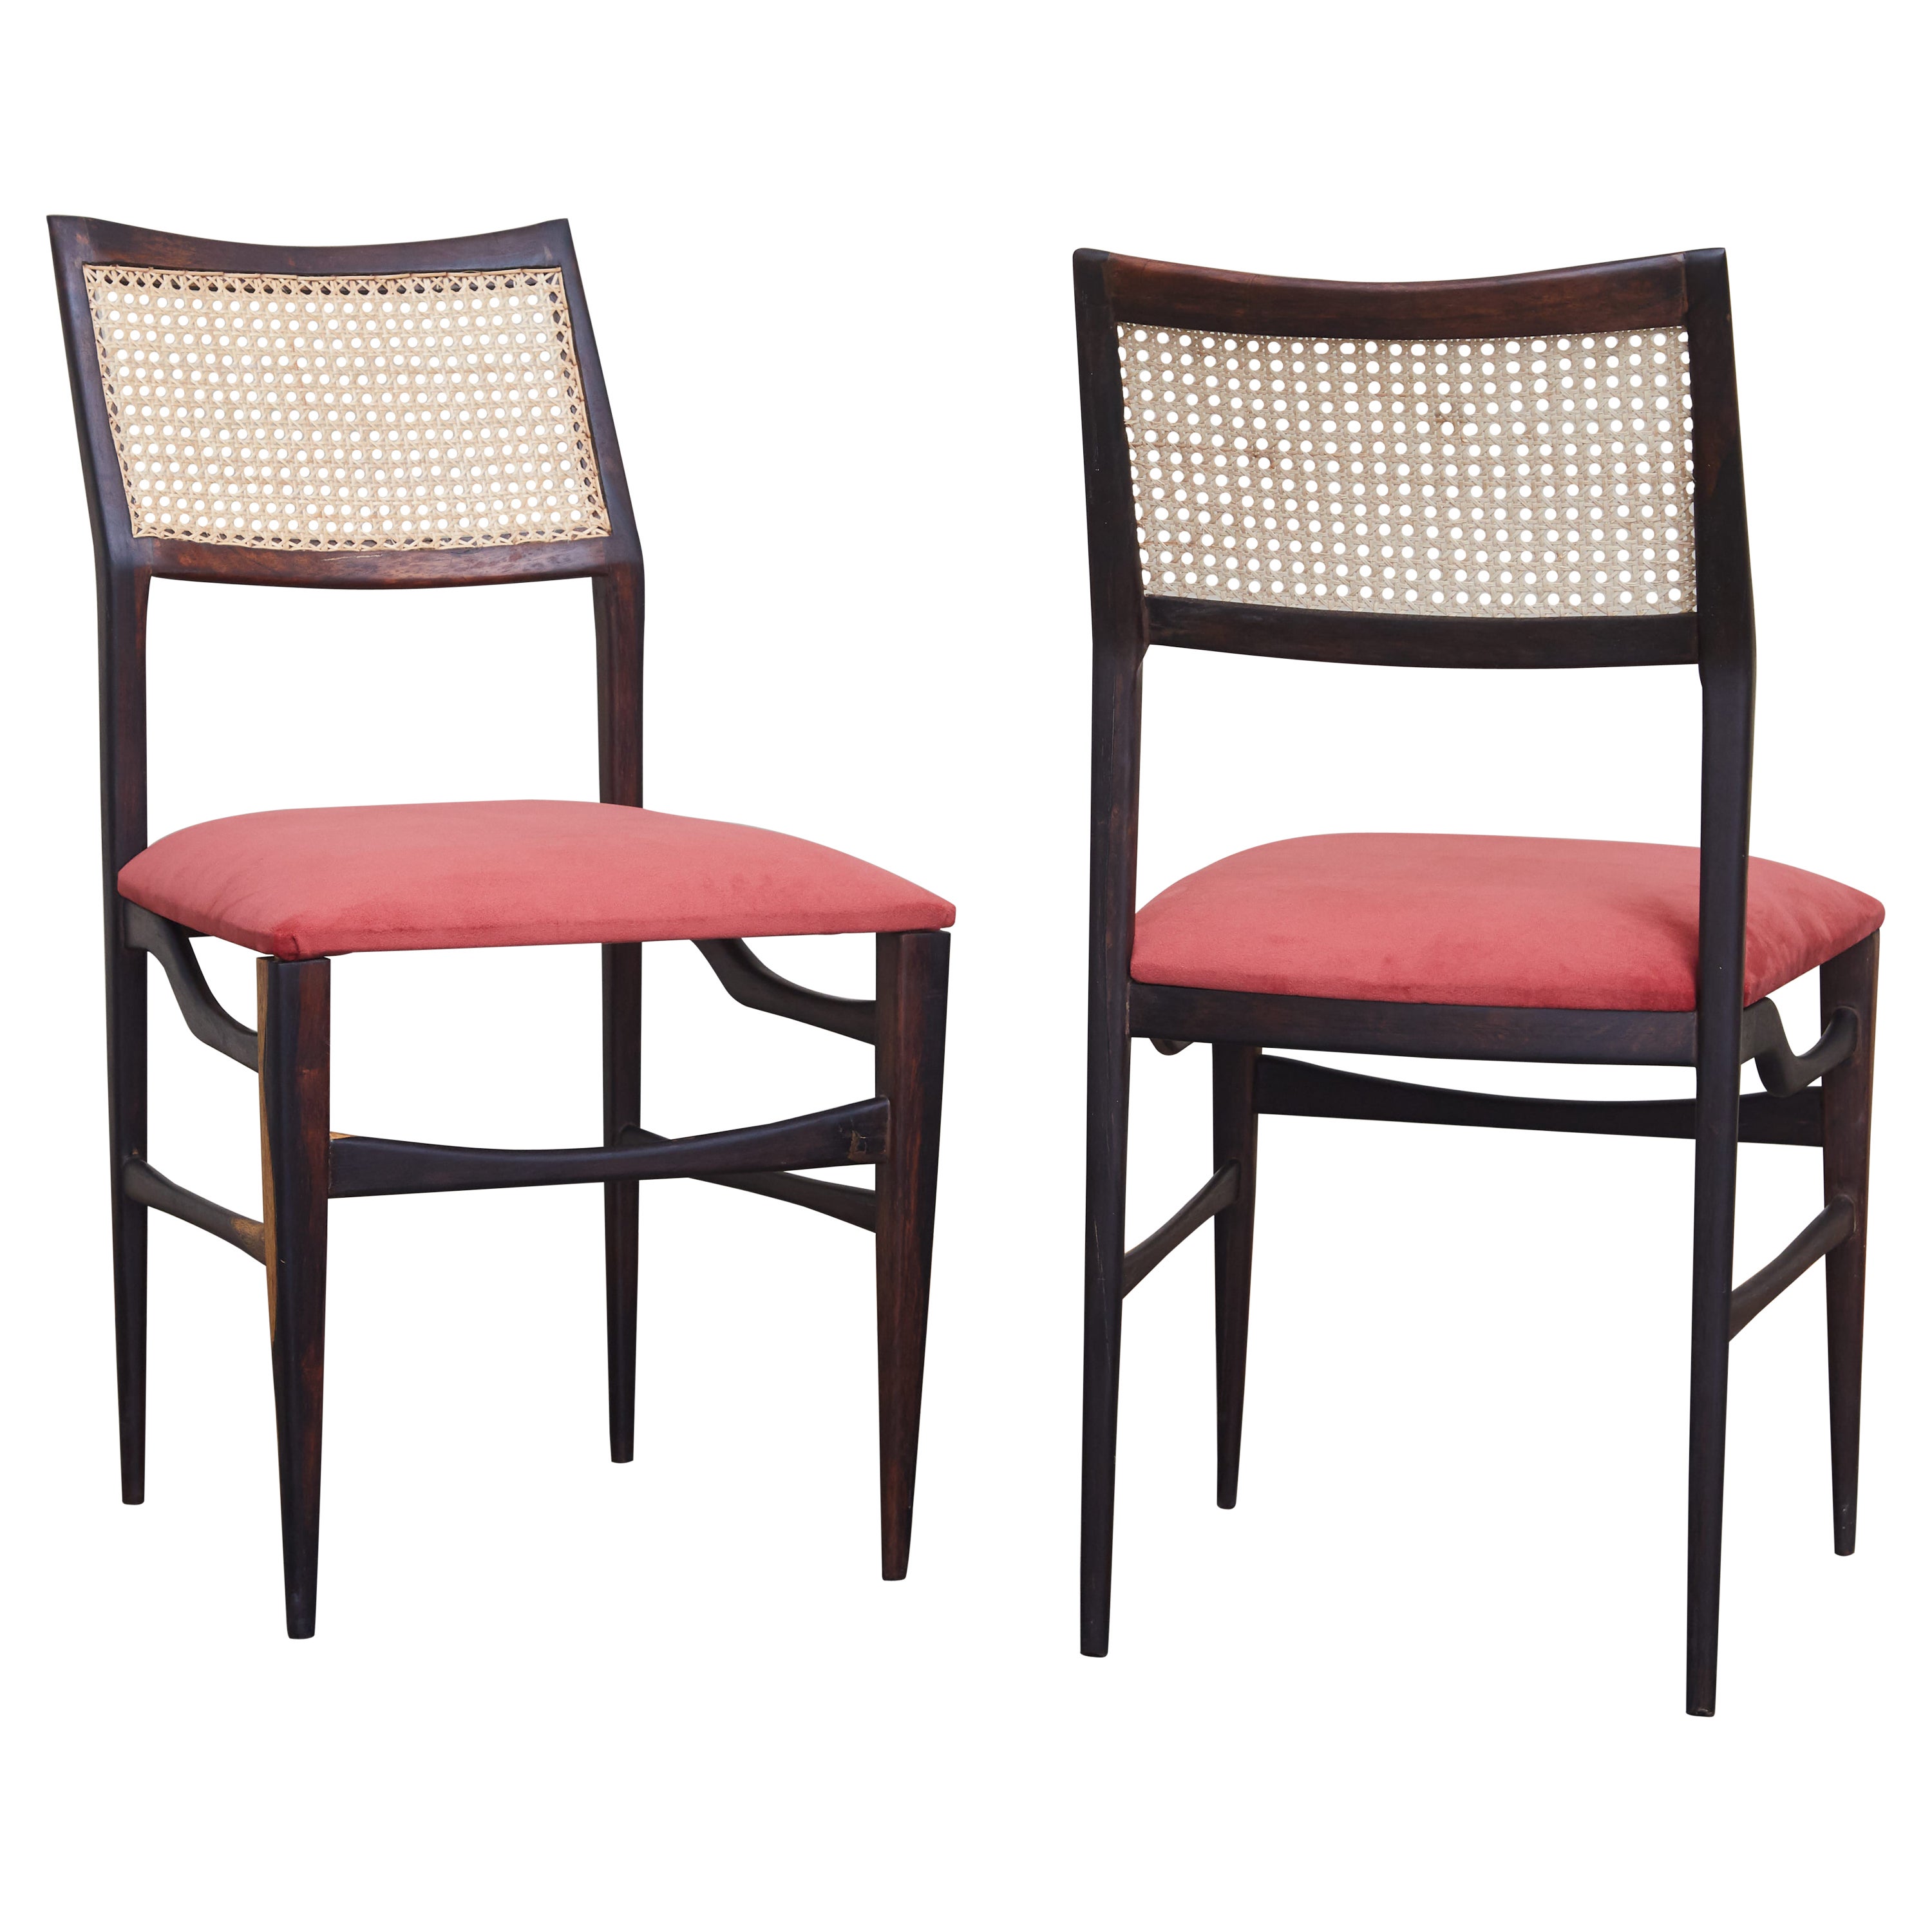 Brazilian Midcentury Chairs in Rosewood and Cane Attributed to Joaquim Tenreiro